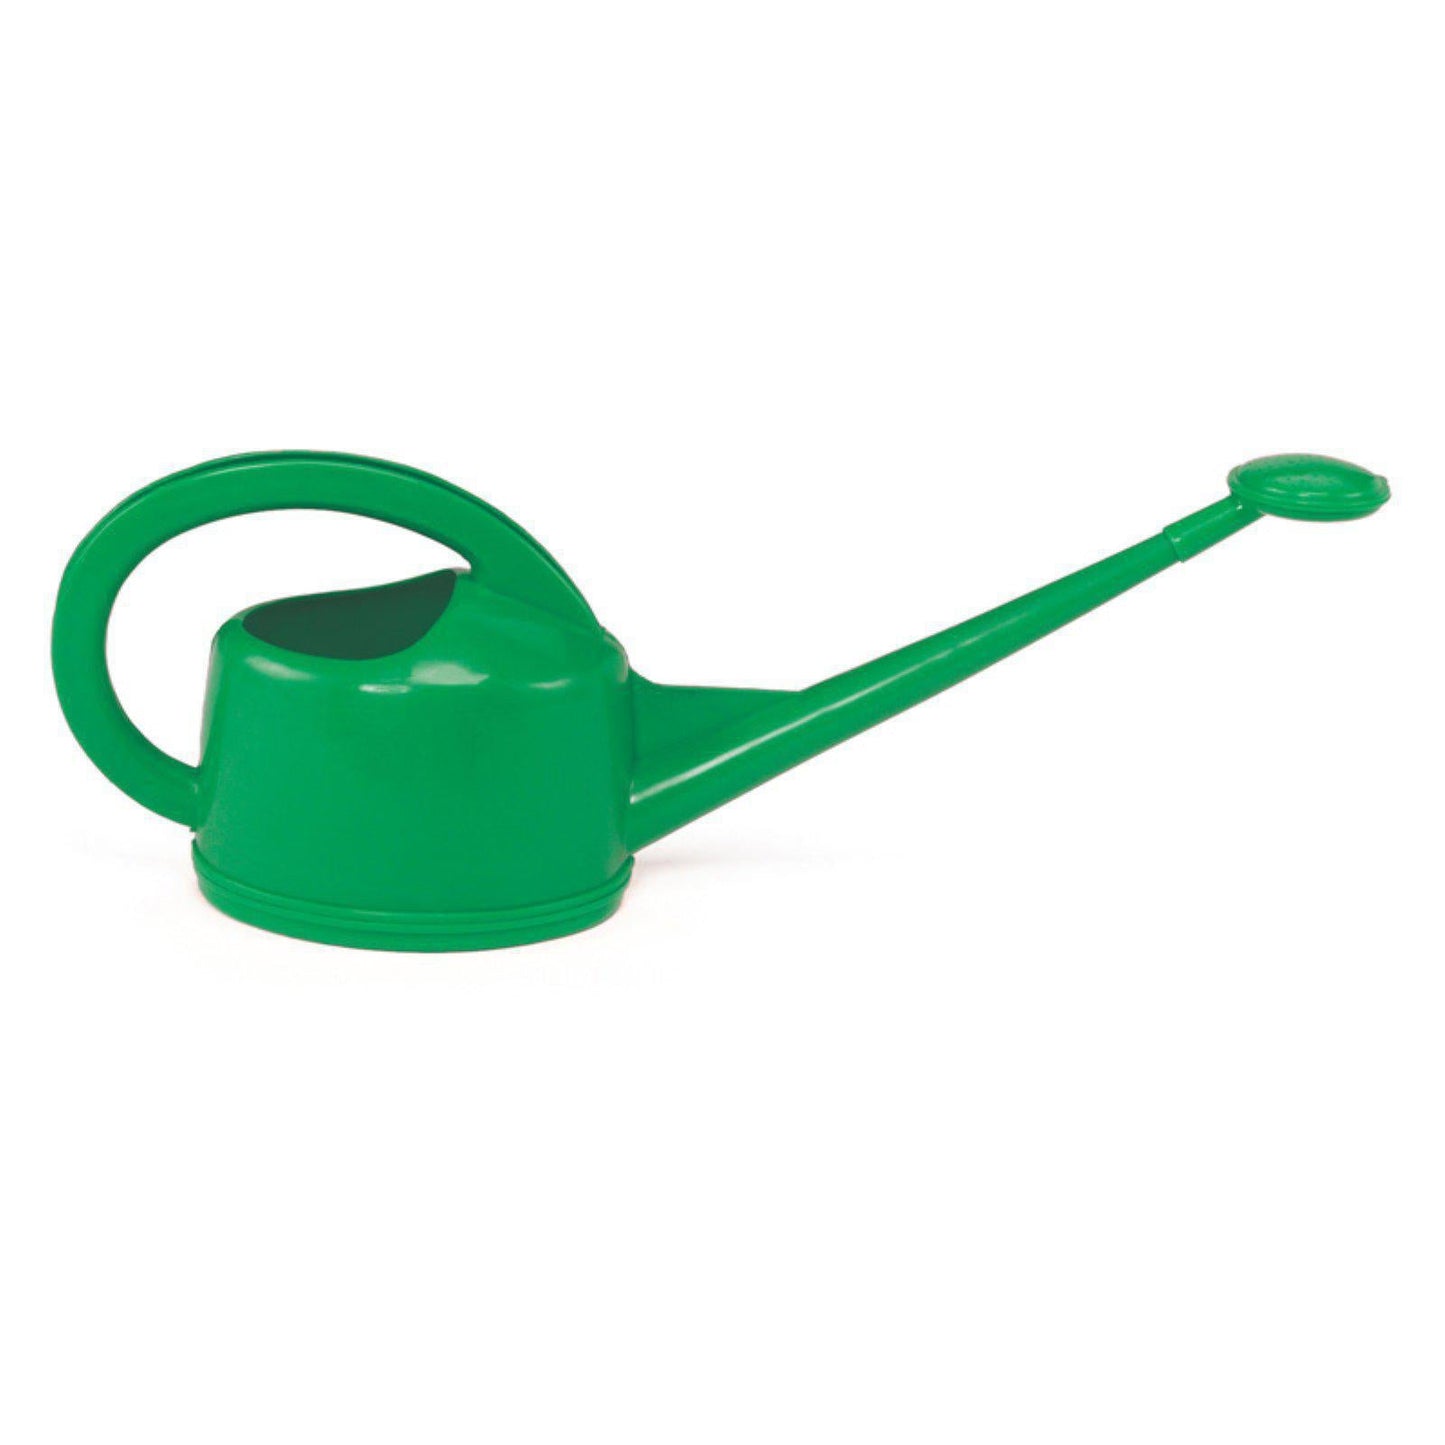 Dramm Watering Can, 2 Liter, Green